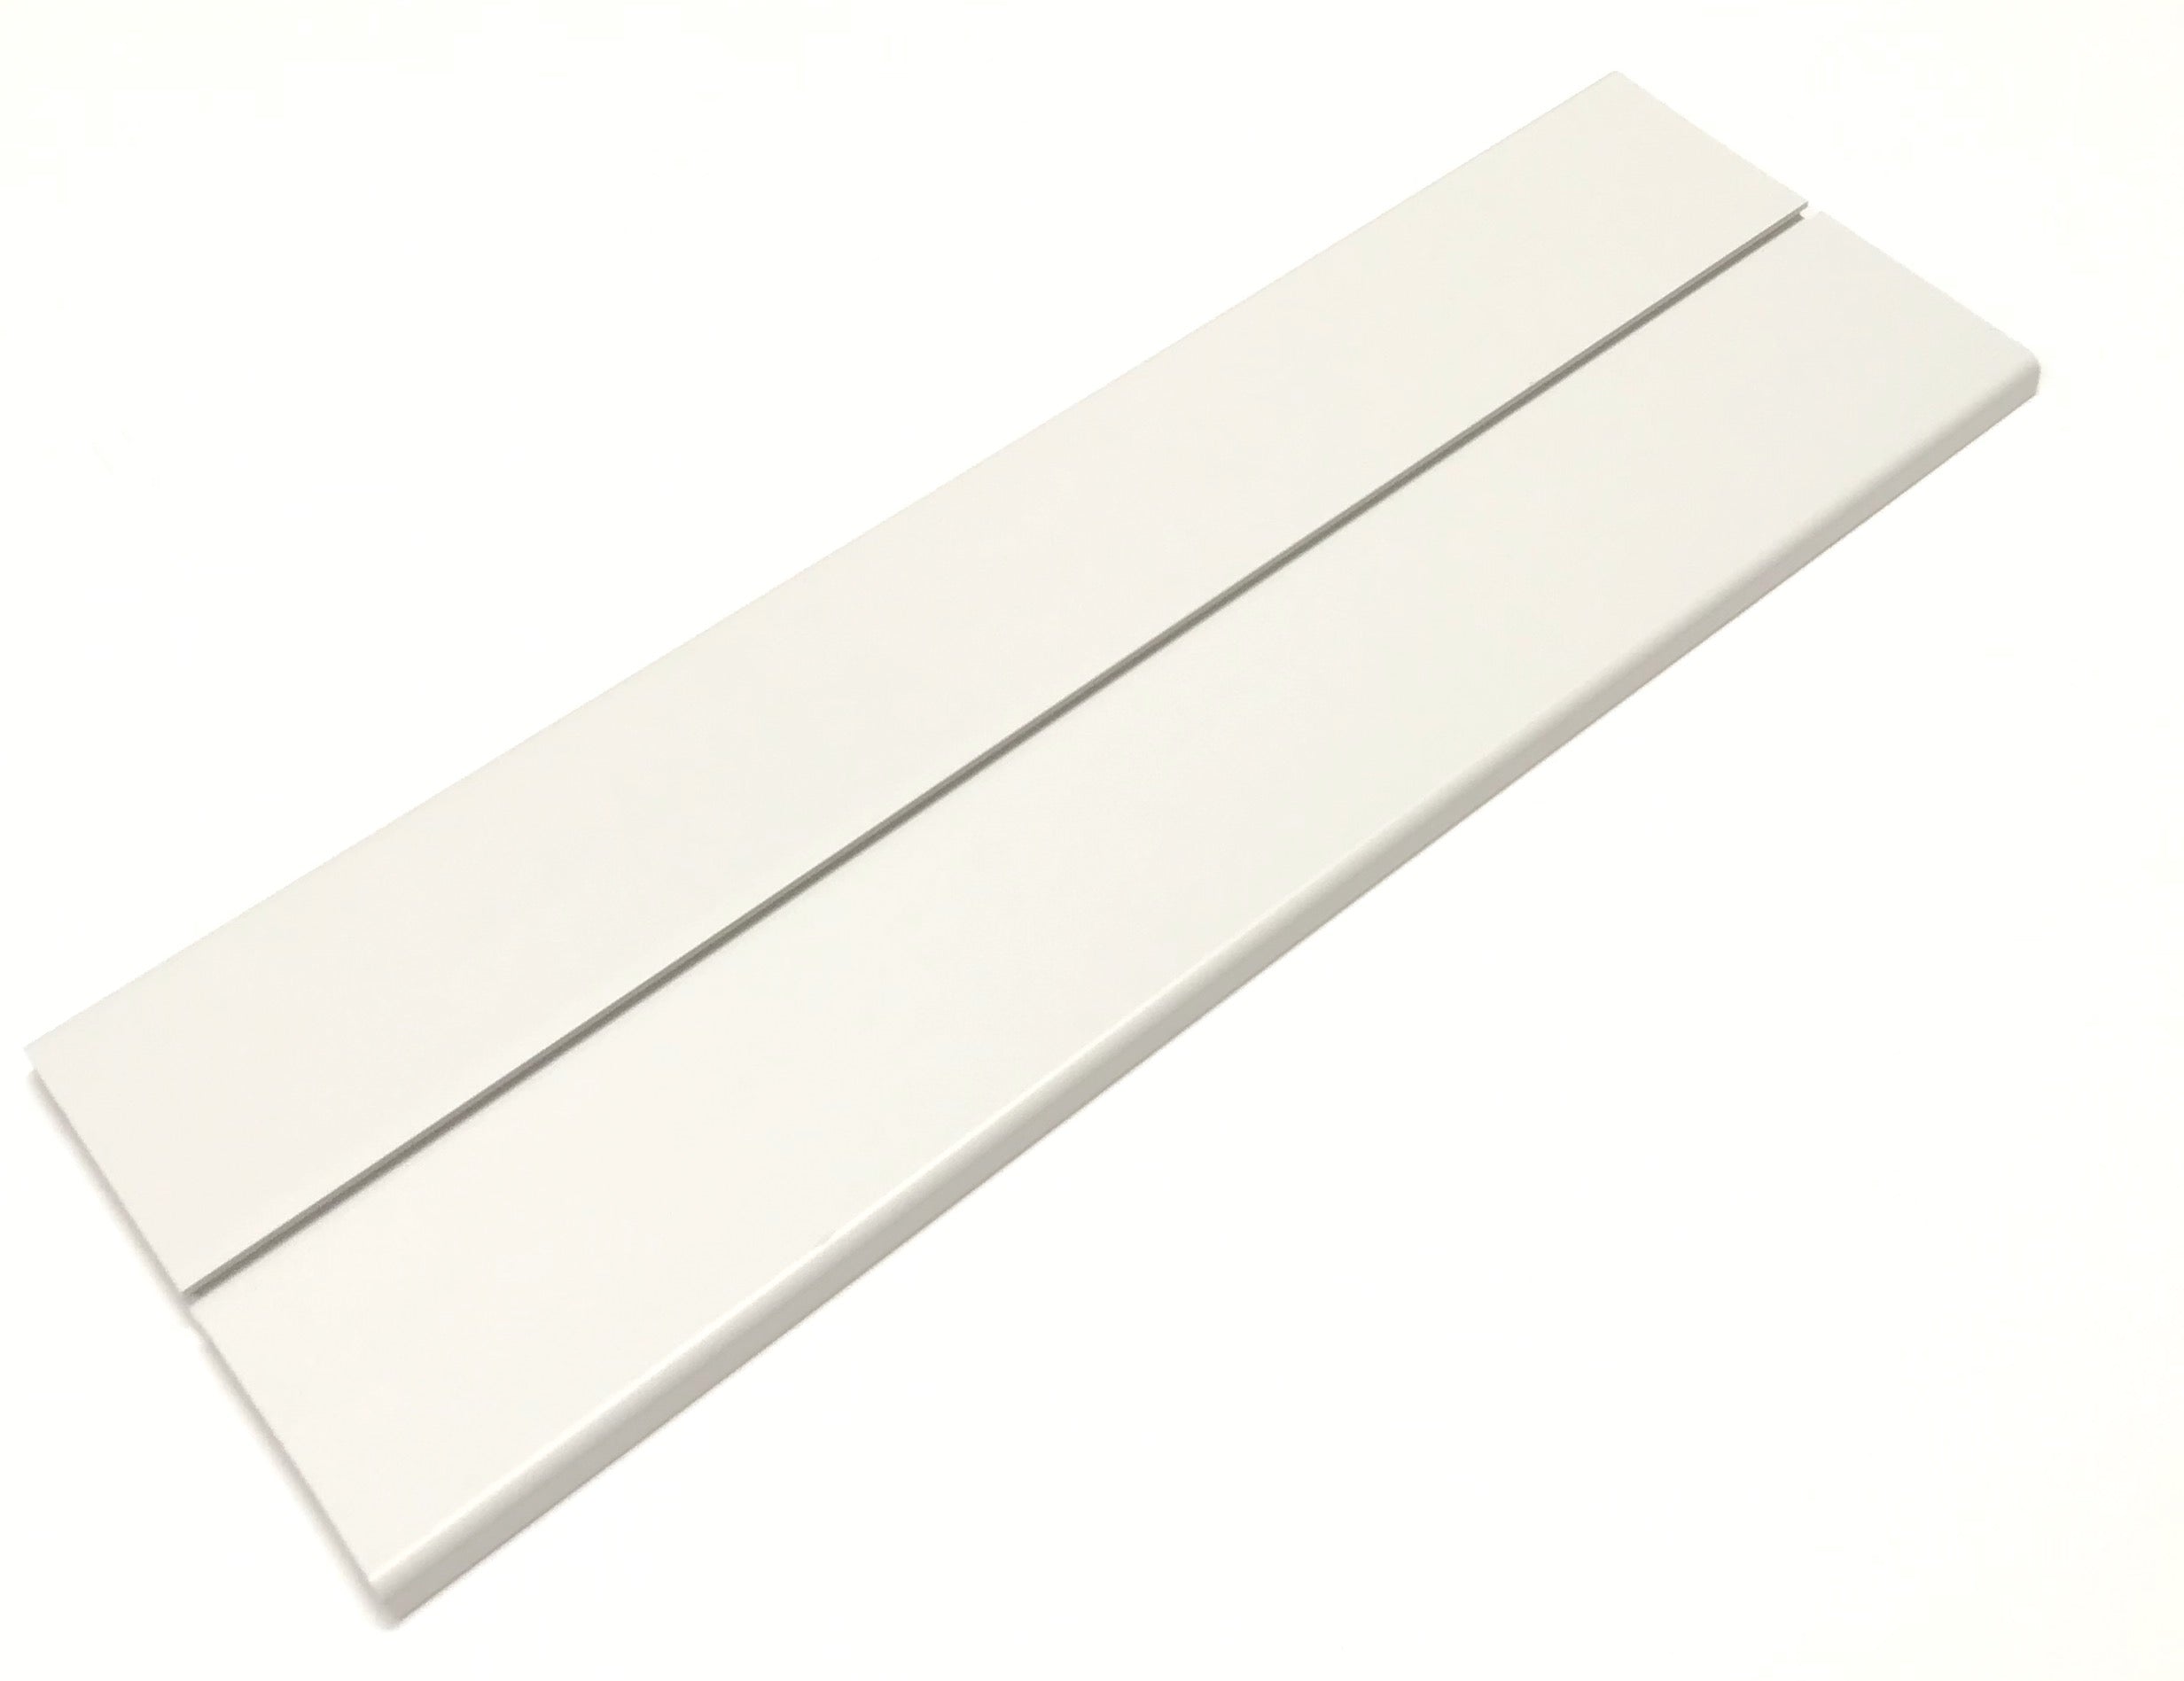 OEM Delonghi Air Conditioner AC Window Slider Extension 19-7/8 Inches Originally Shipped With PACEX390LVYN6AWH